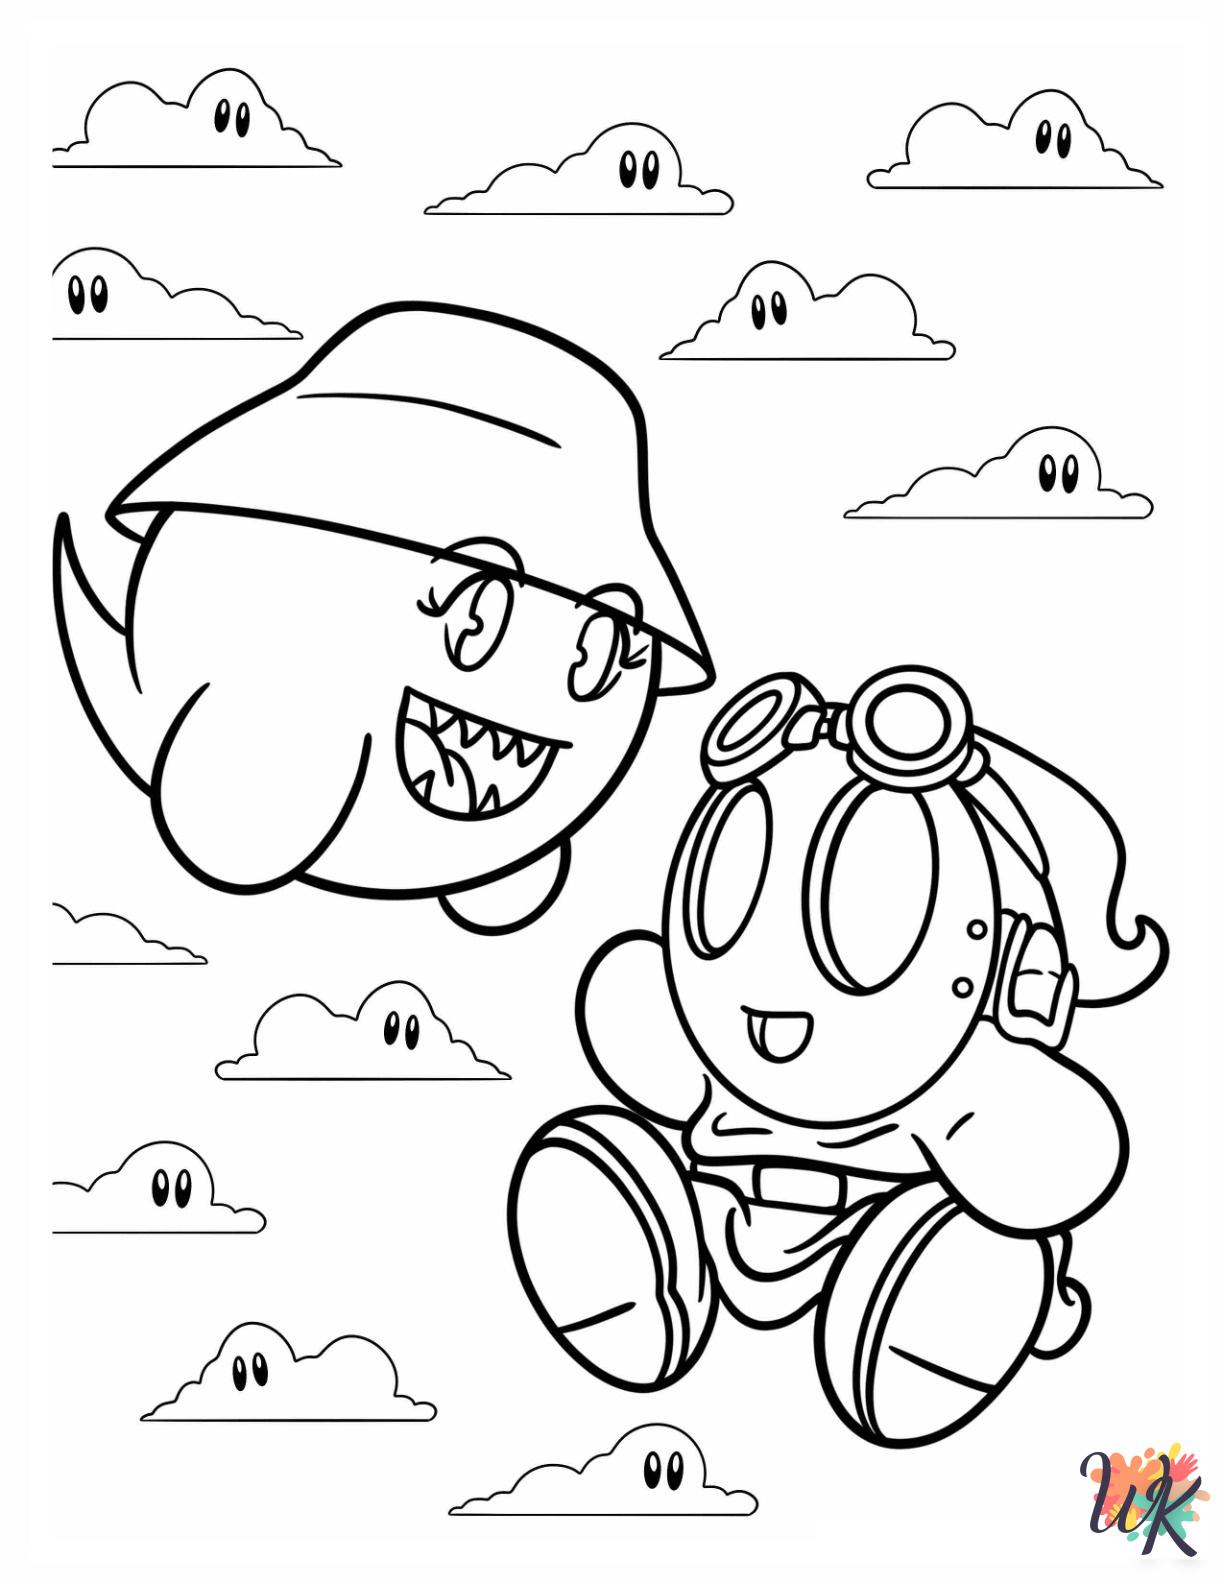 Shy Guy free coloring pages